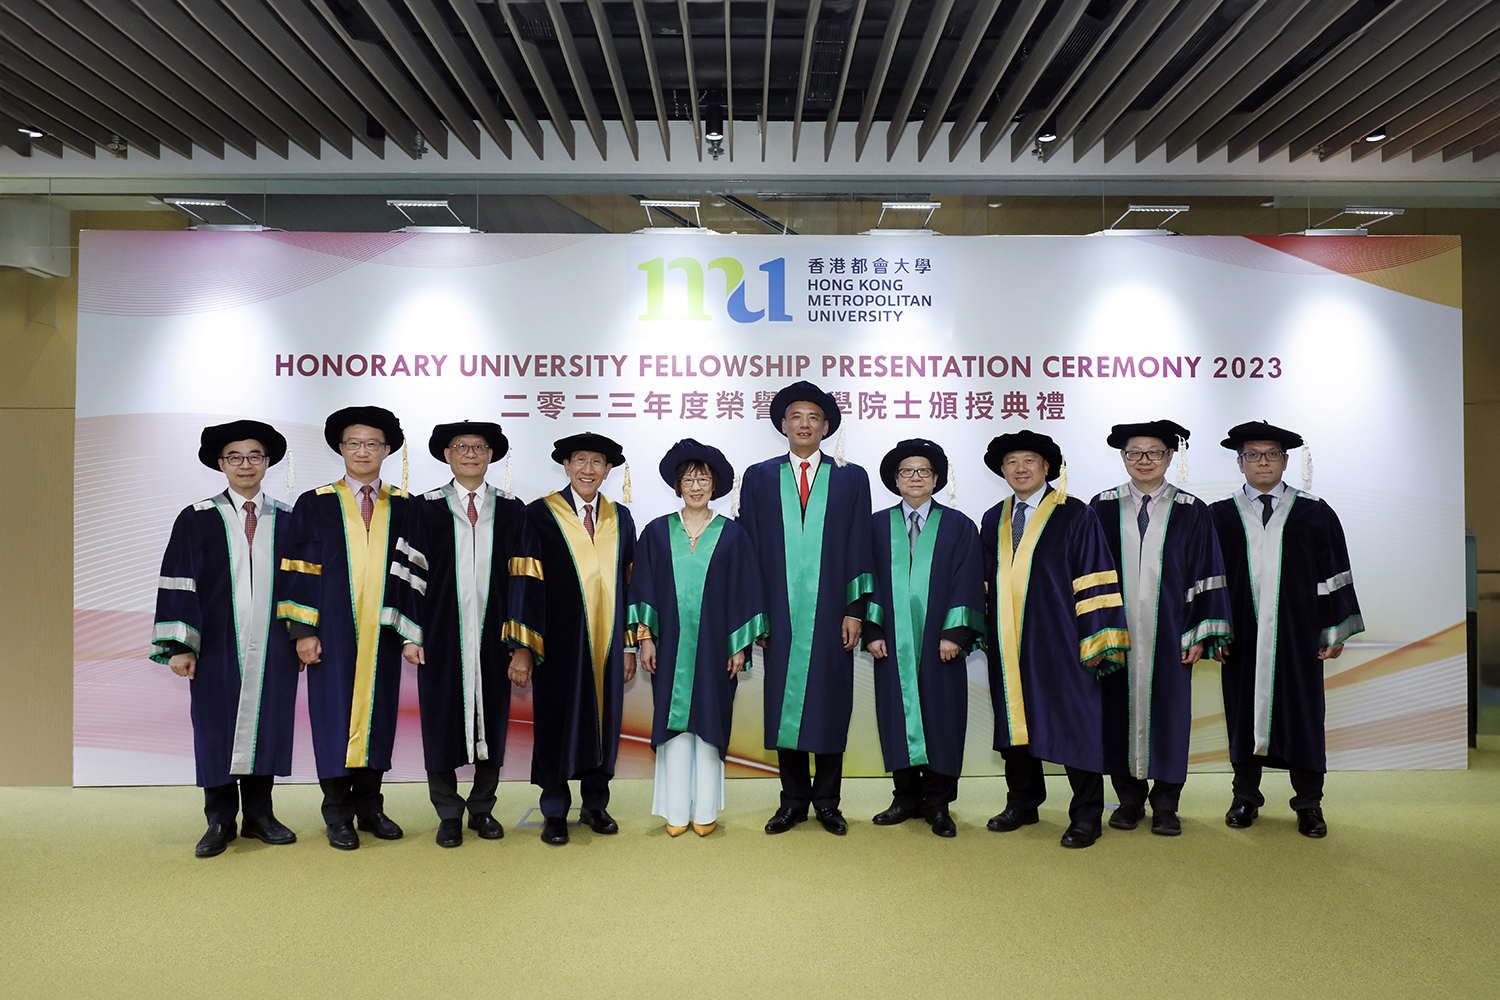 Group photo of the HKMU Principal Officers and the Honorary University Fellowship recipients.